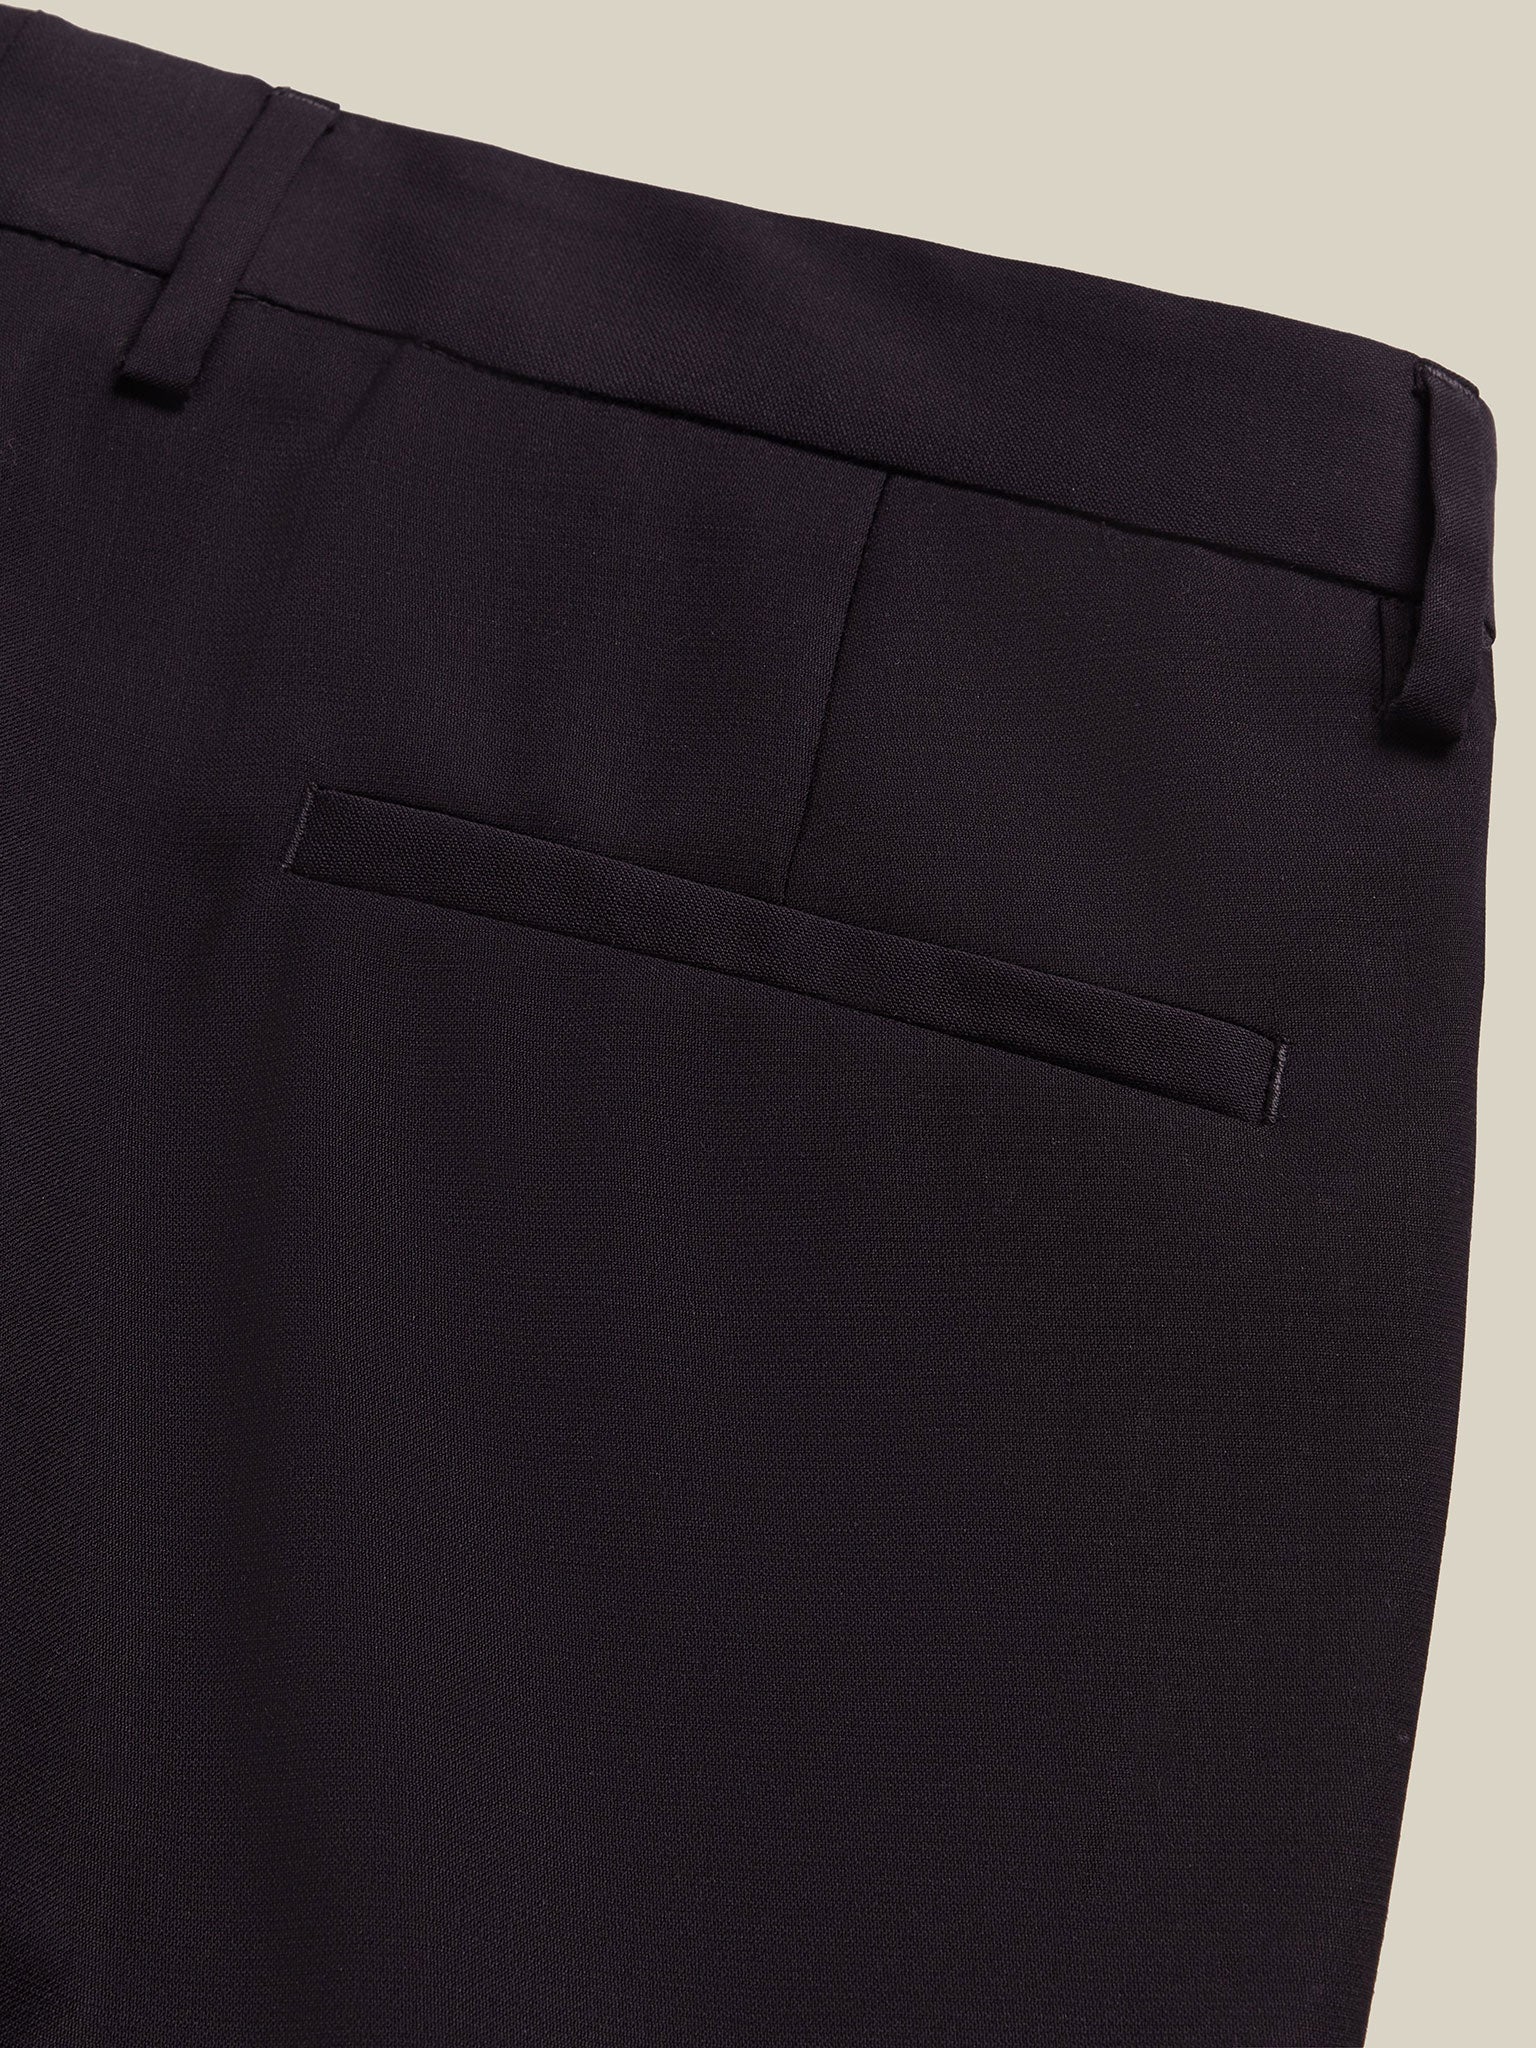 Tailored men's blue wool trousers for men with slim fit and natural texture